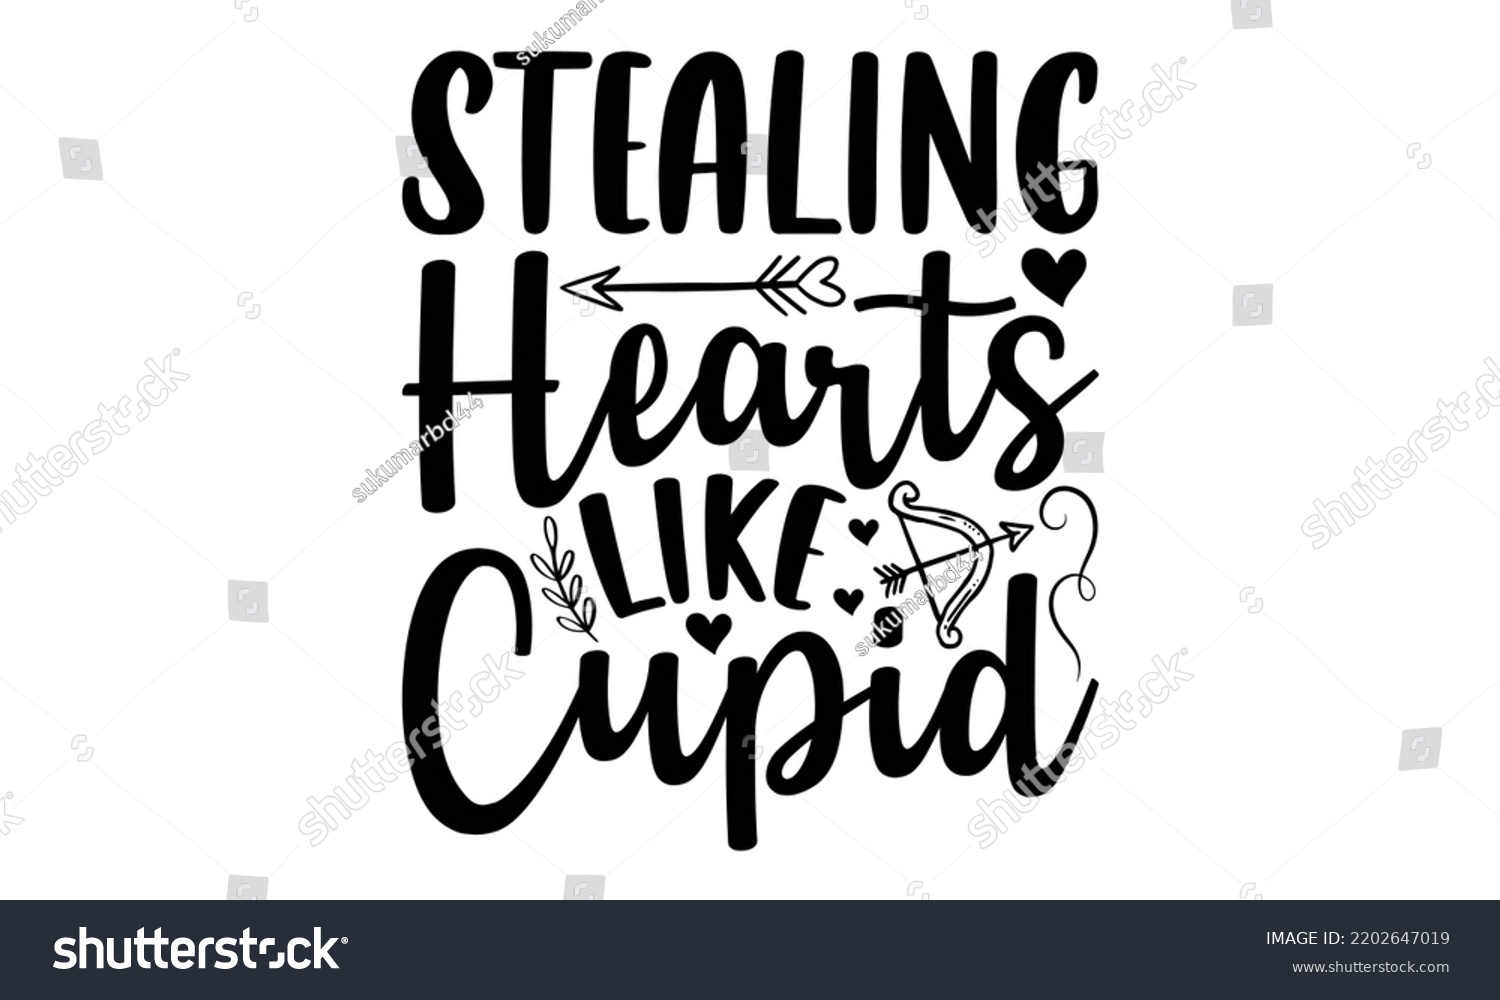 SVG of Stealing Hearts Like Cupid - Valentine's Day 2023 quotes svg design, Hand drawn vintage hand lettering, This illustration can be used as a print on t-shirts and bags, stationary or as a poster. svg